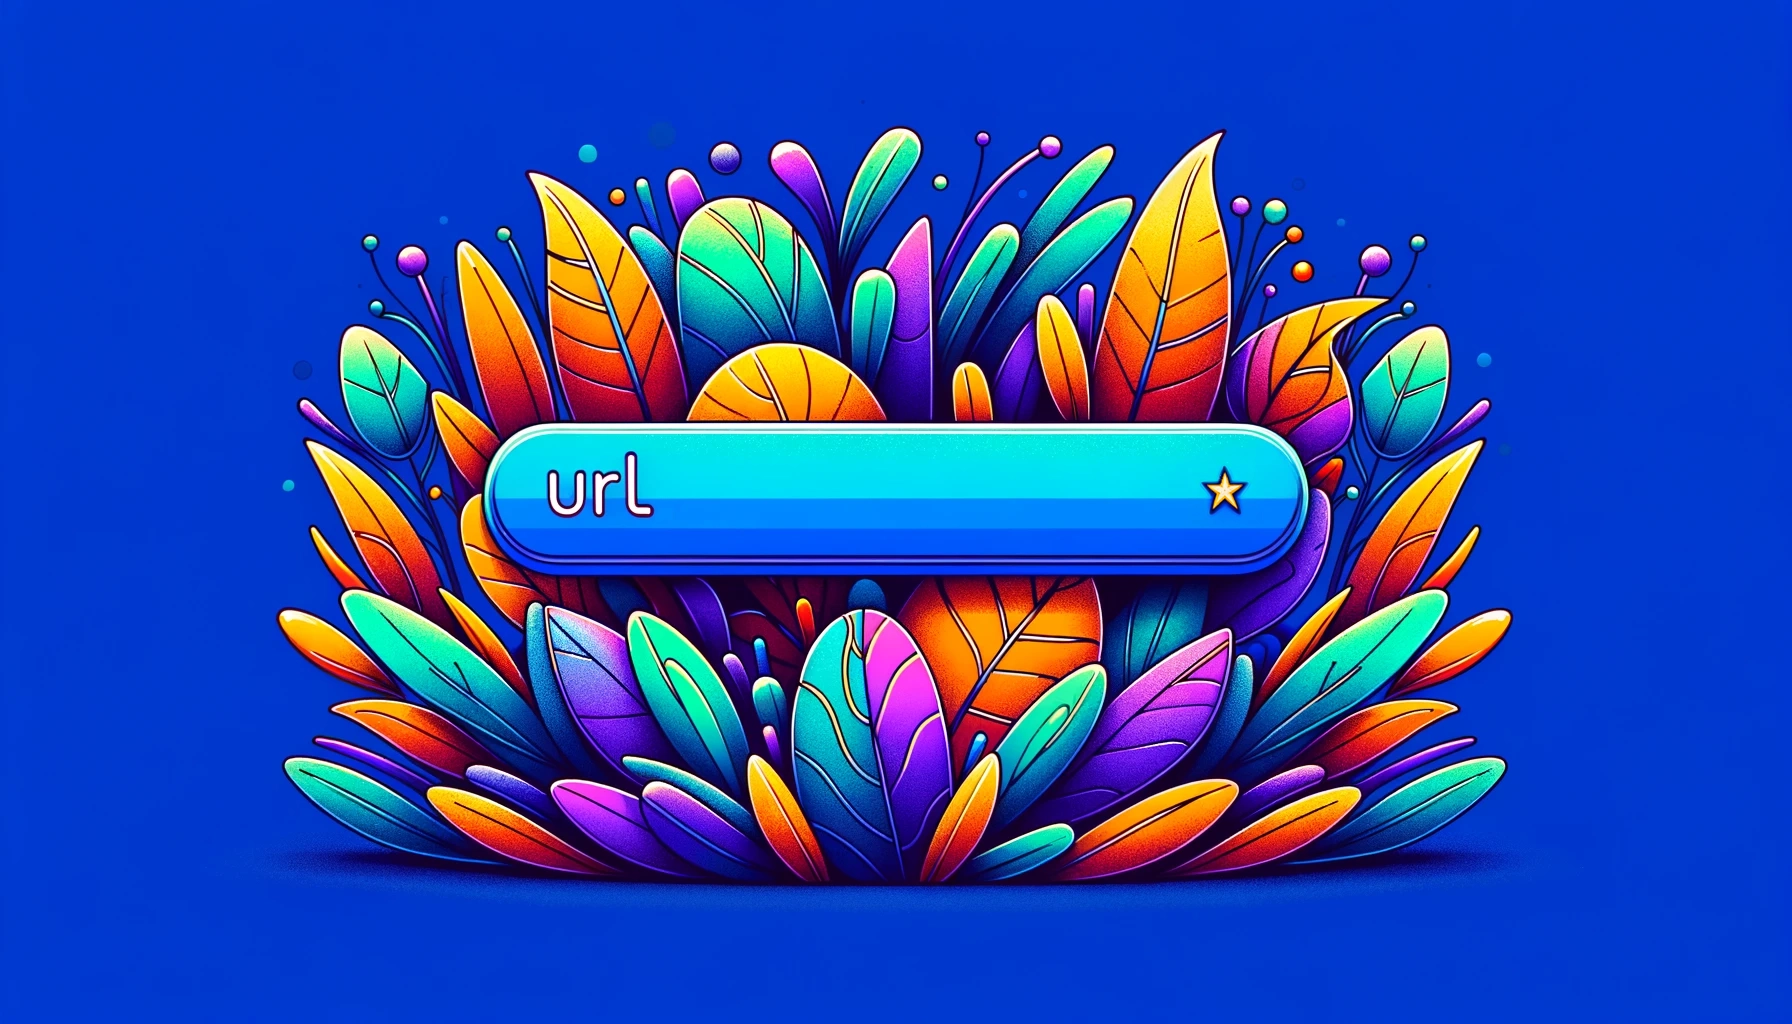 url cover - url bar and plants